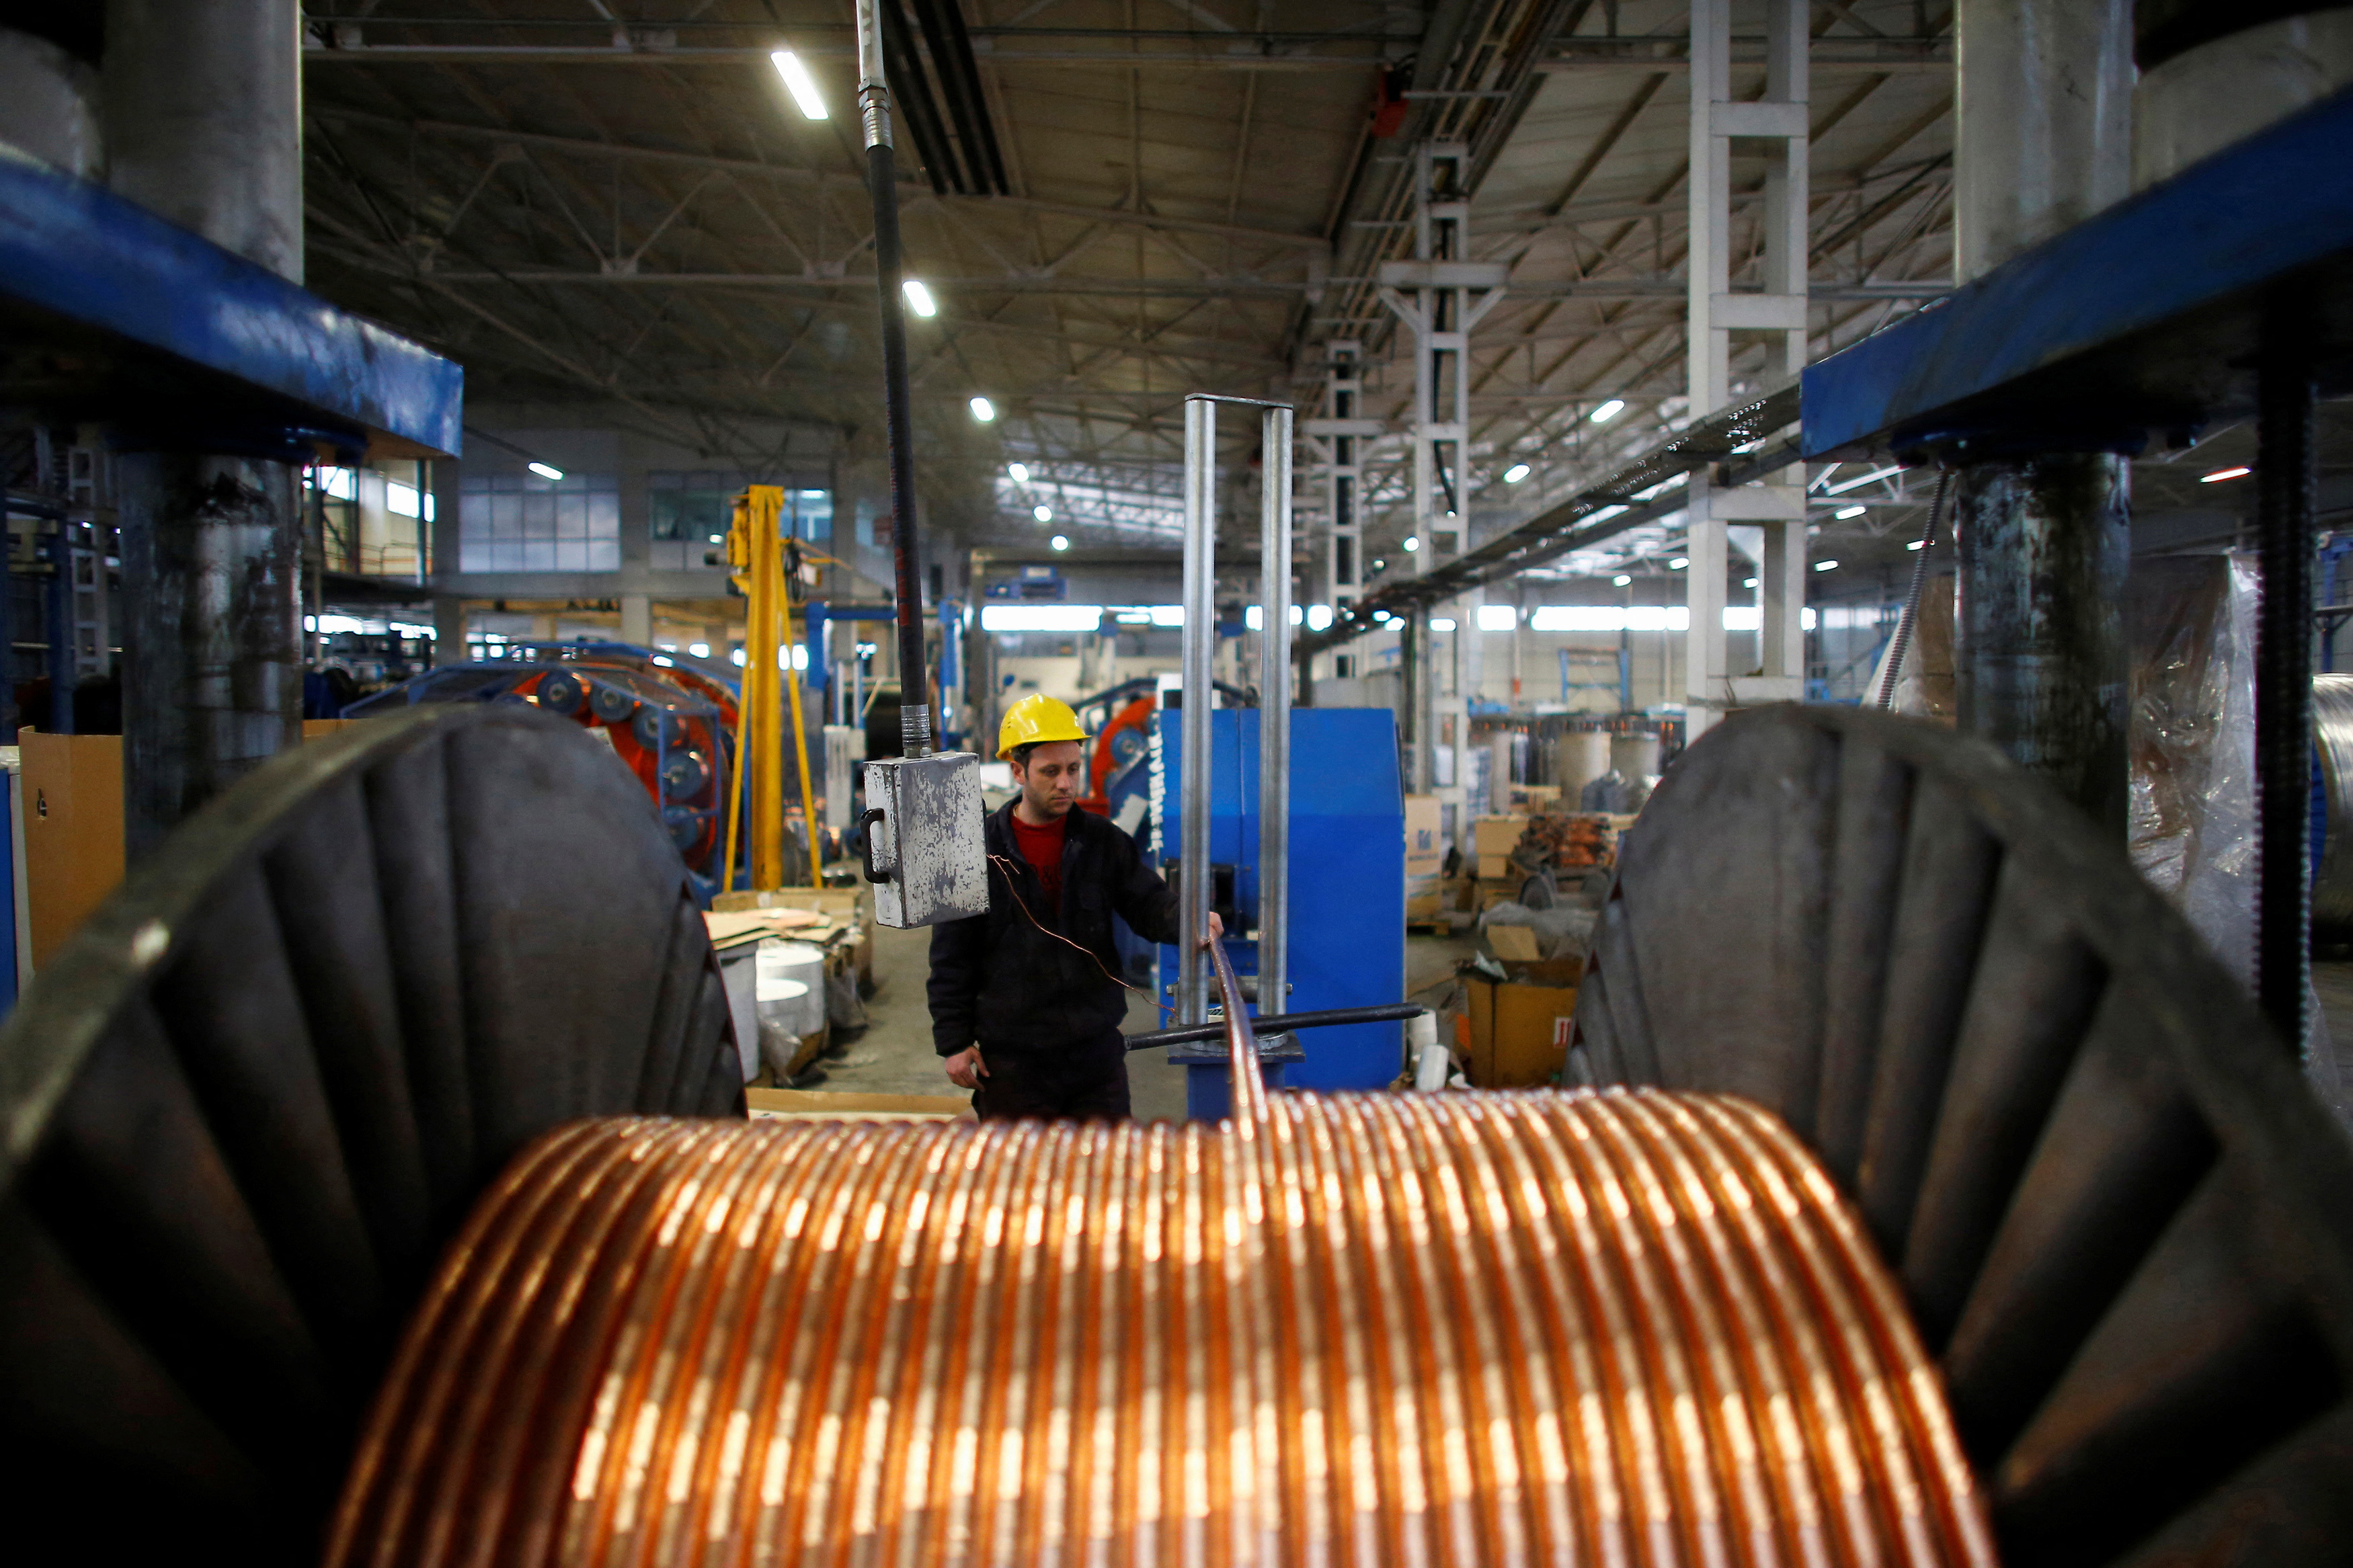 A worker checks copper cables being produced at a factory in the central Anatolian city of Kayseri